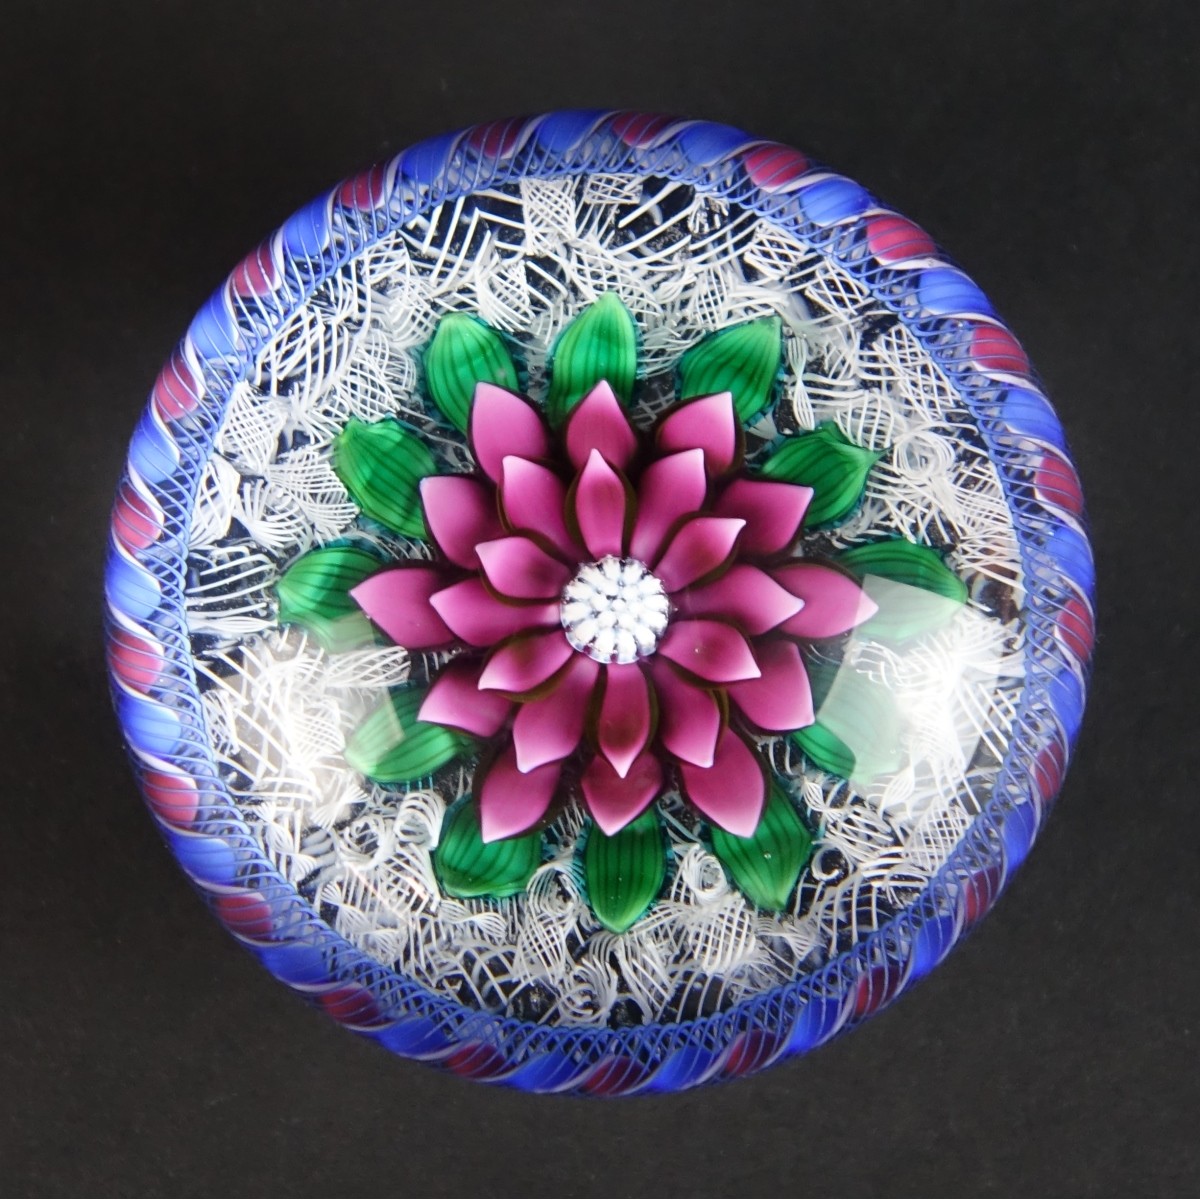 Antique Baccarat Paperweight